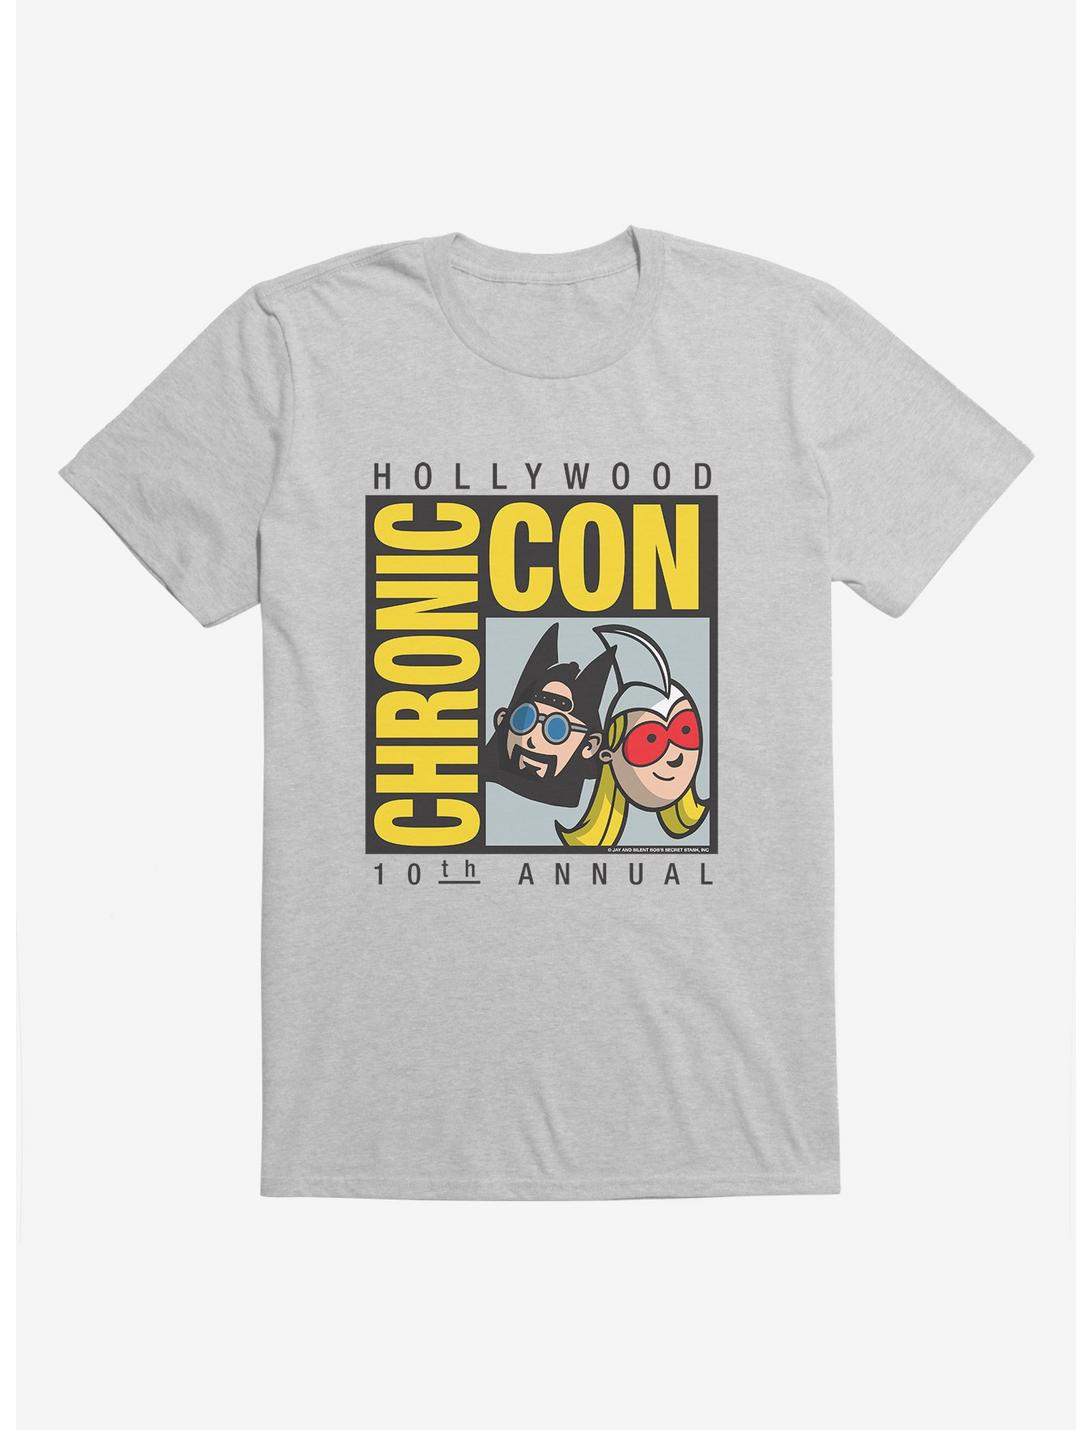 Jay And Silent Bob 10th Annual Chronic Con T-Shirt Hot Topic Exclusive, , hi-res